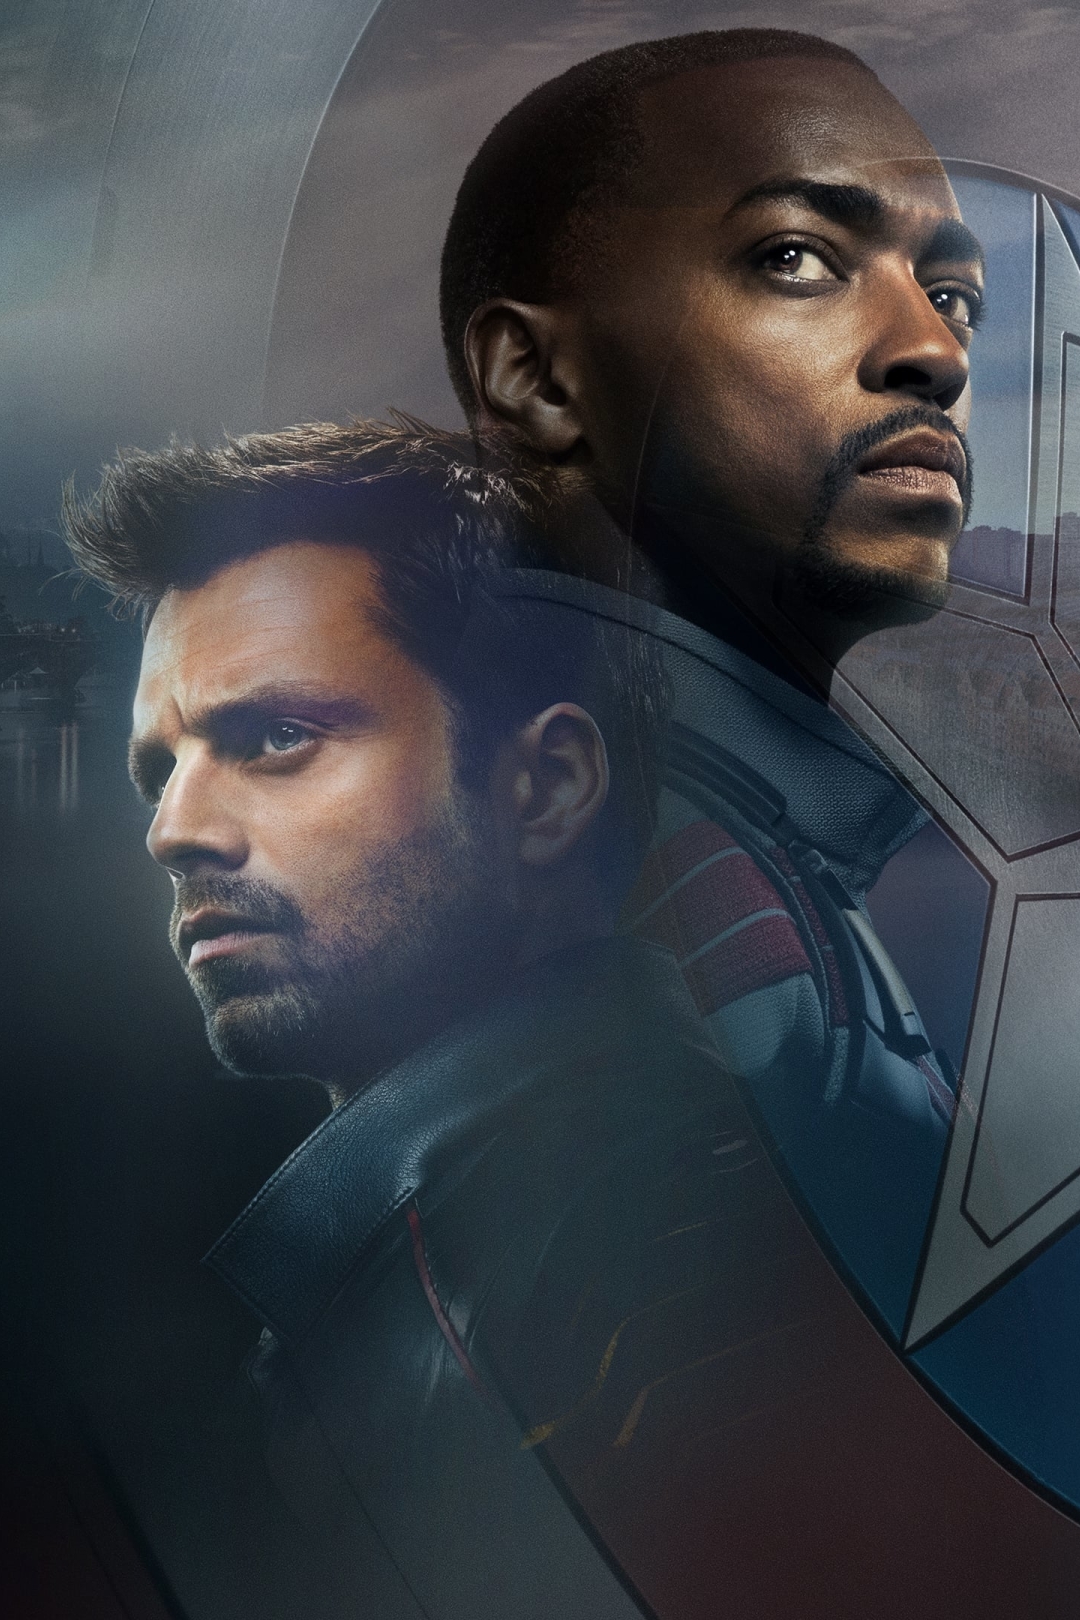 1080x1620 The Falcon and the Winter Soldier Official Poster 1080x1620